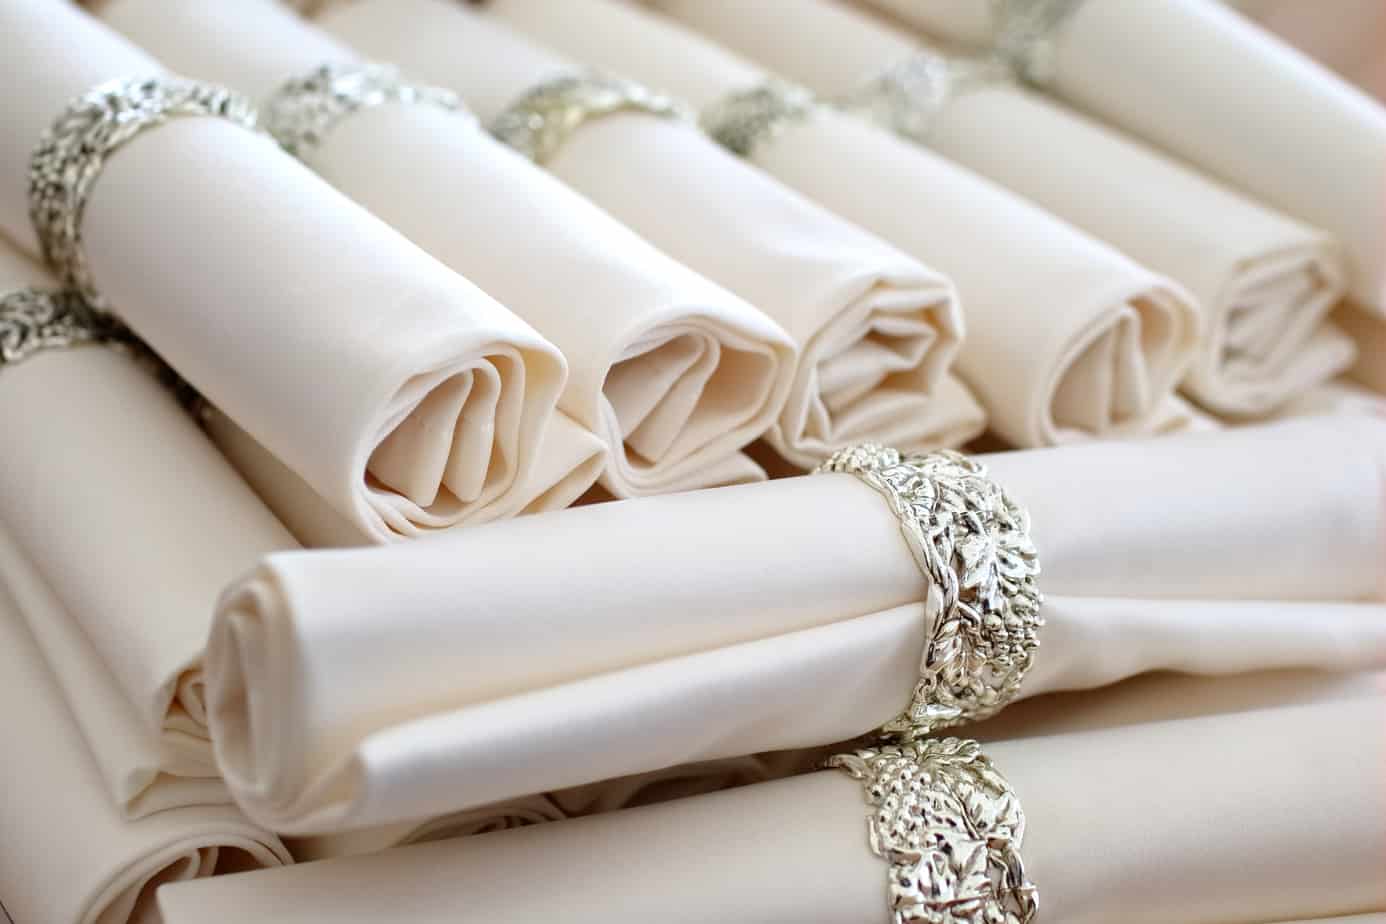 Linen Rentals are Essential for Your Party or Event